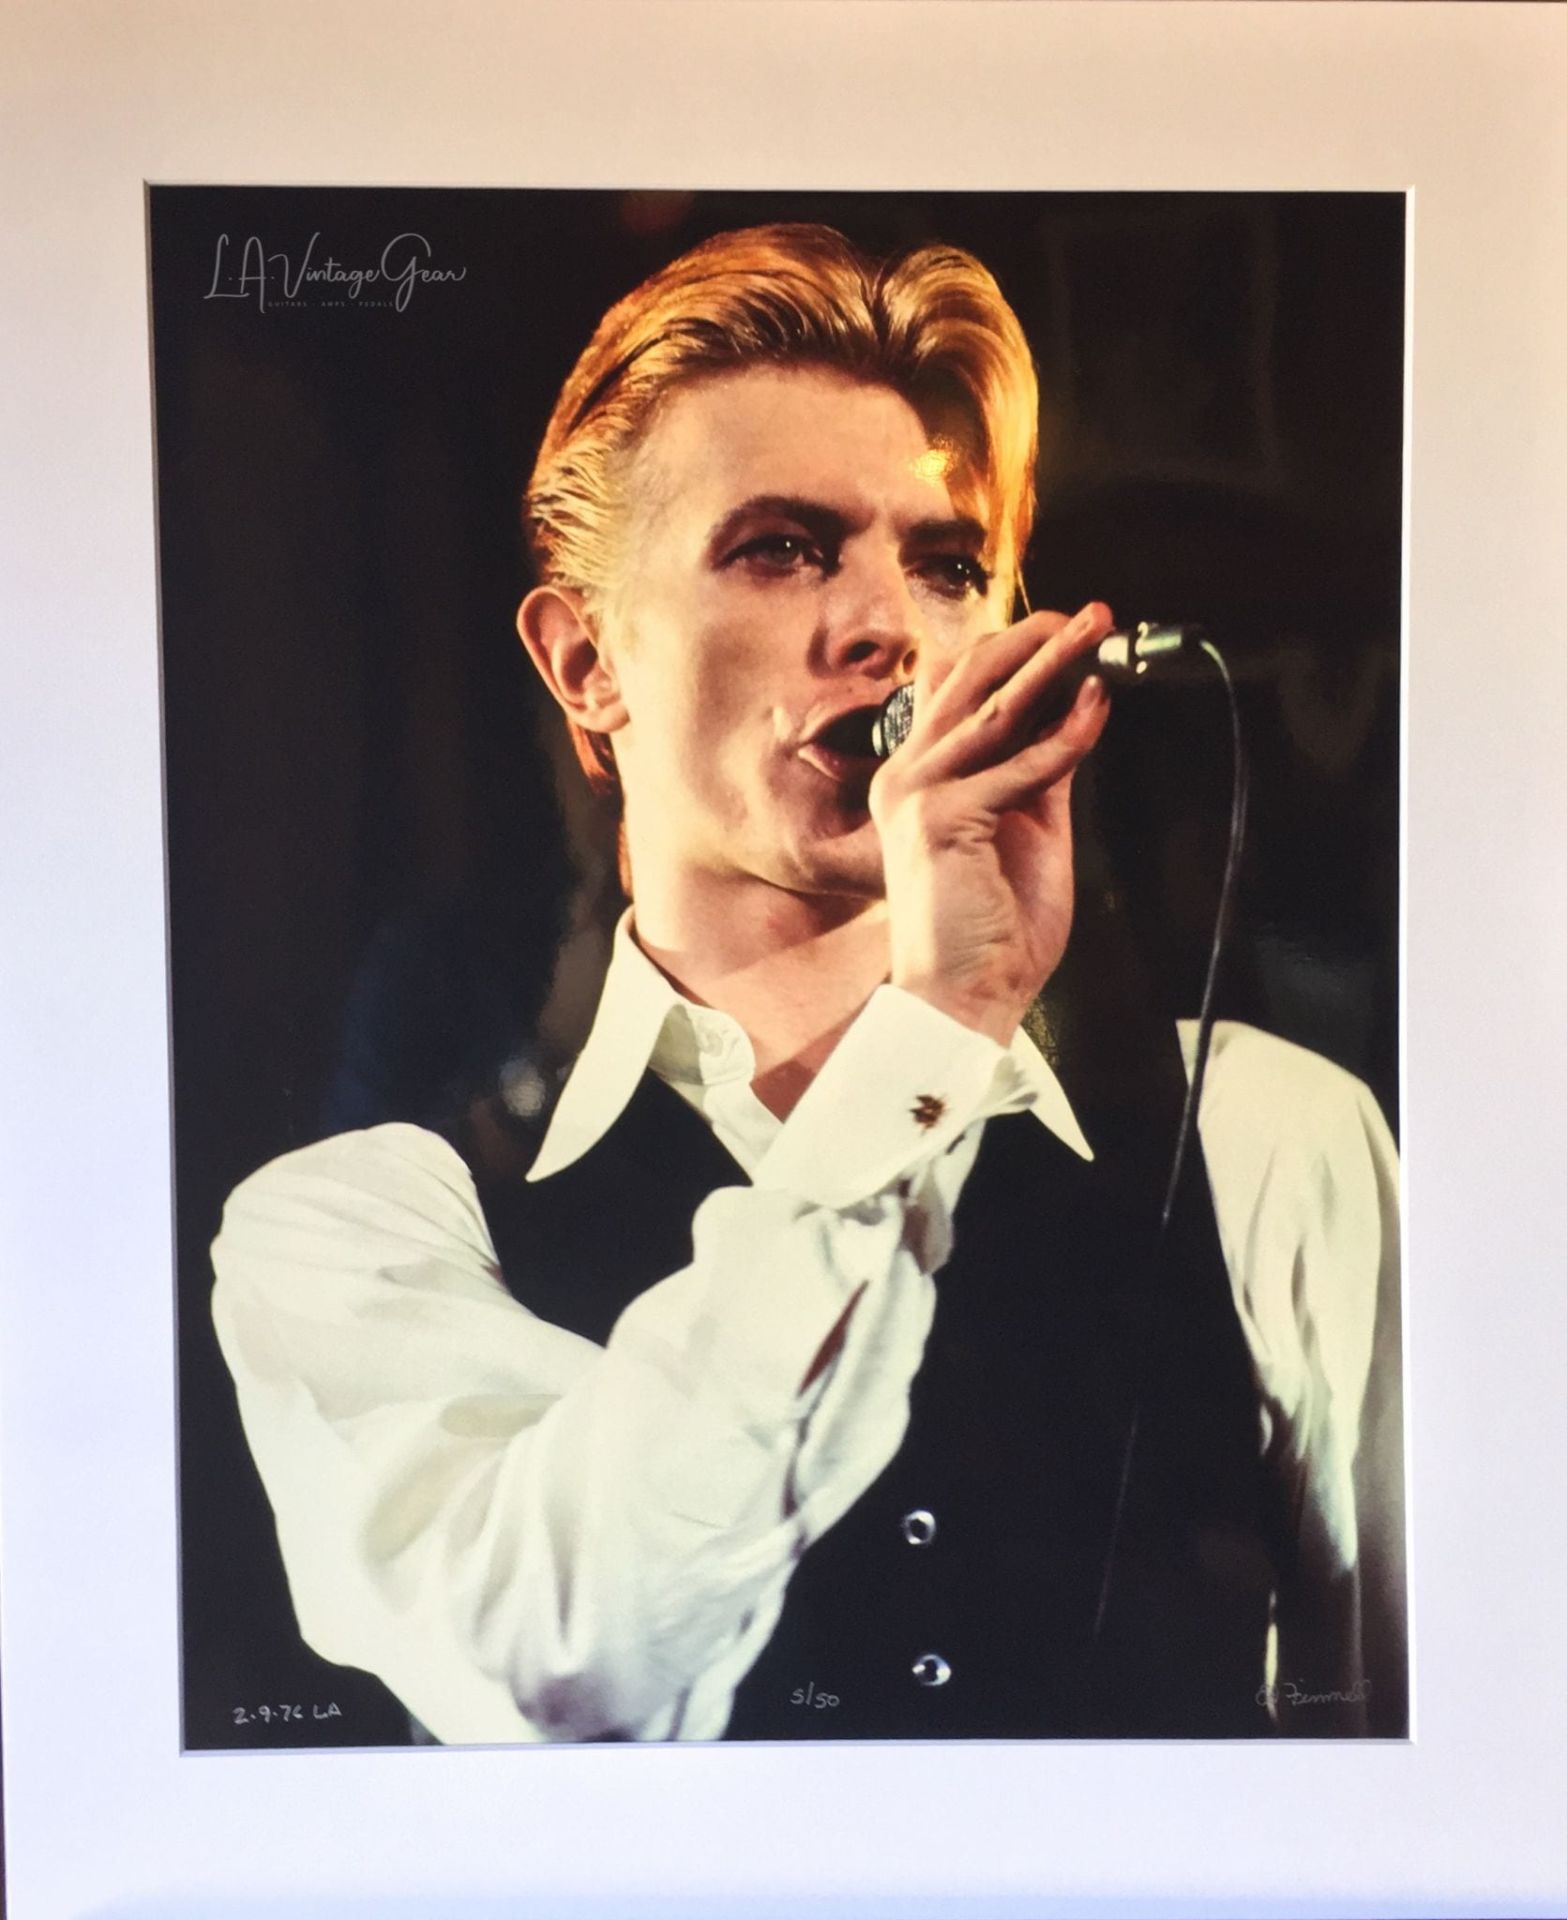 David Bowie Station To Station Tour